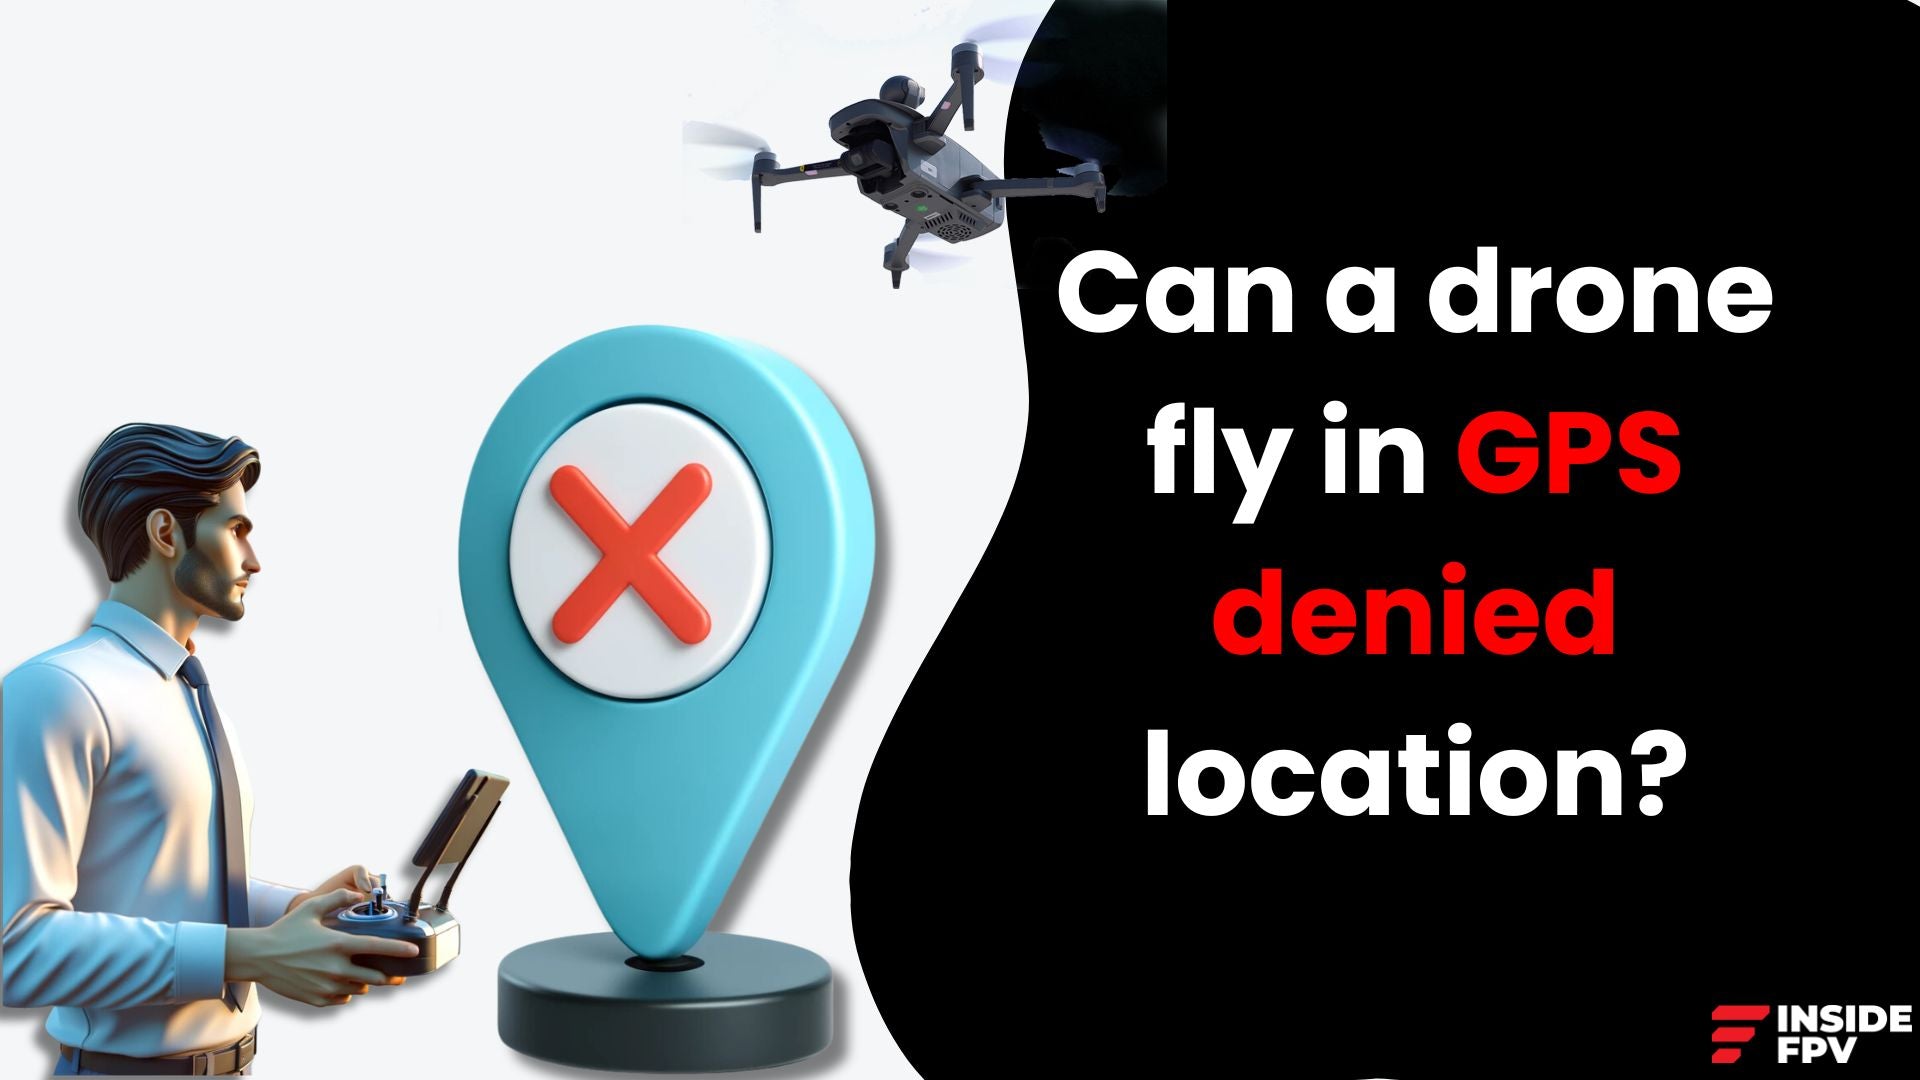 Can a drone fly in GPS denied location?